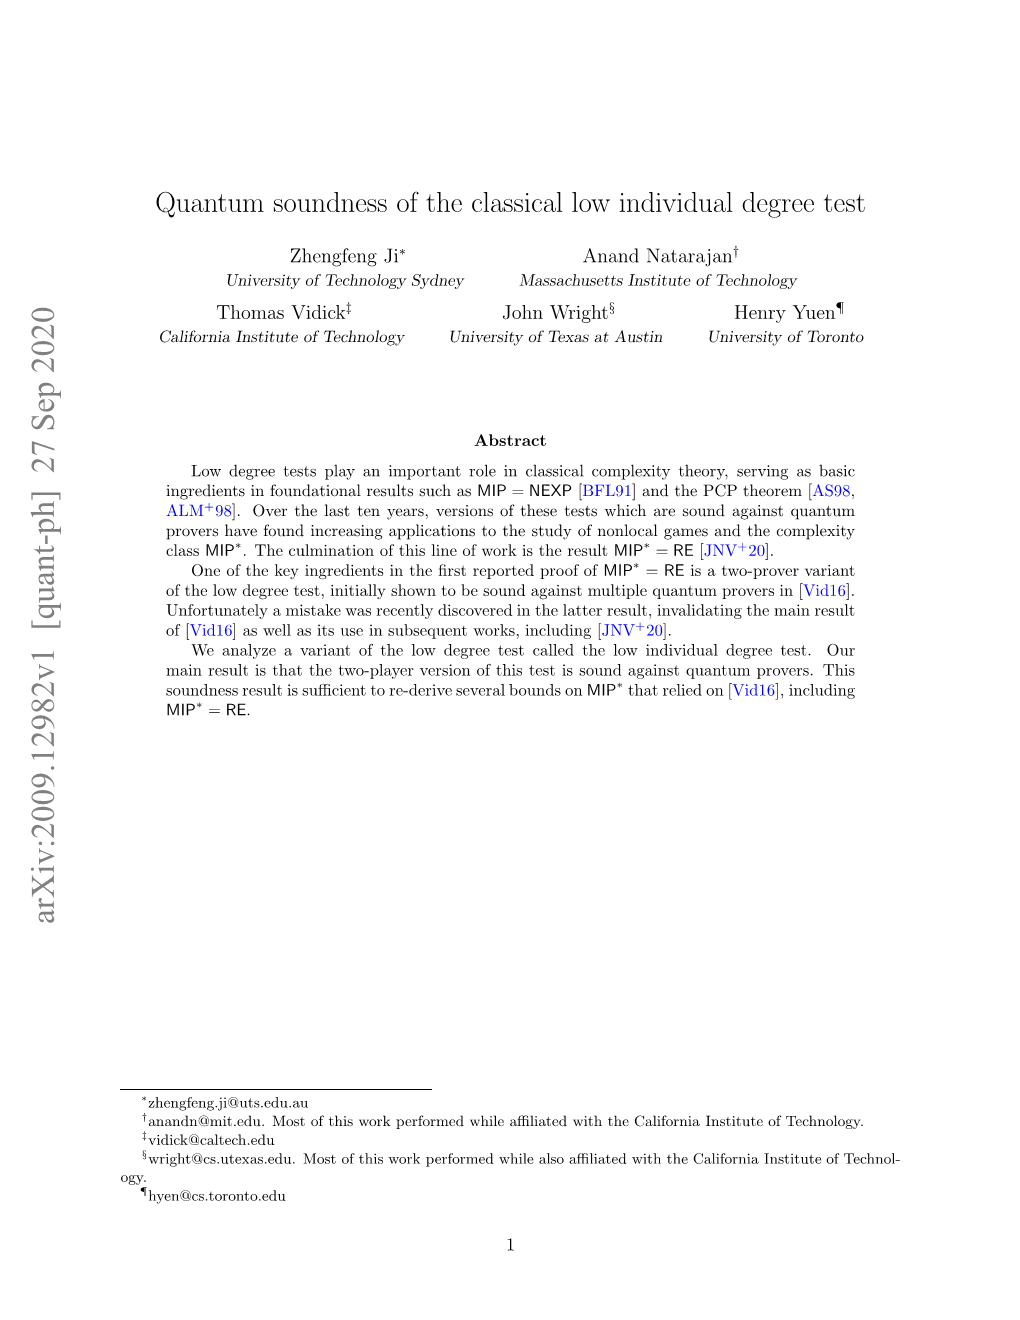 Quantum Soundness of the Classical Low Individual Degree Test